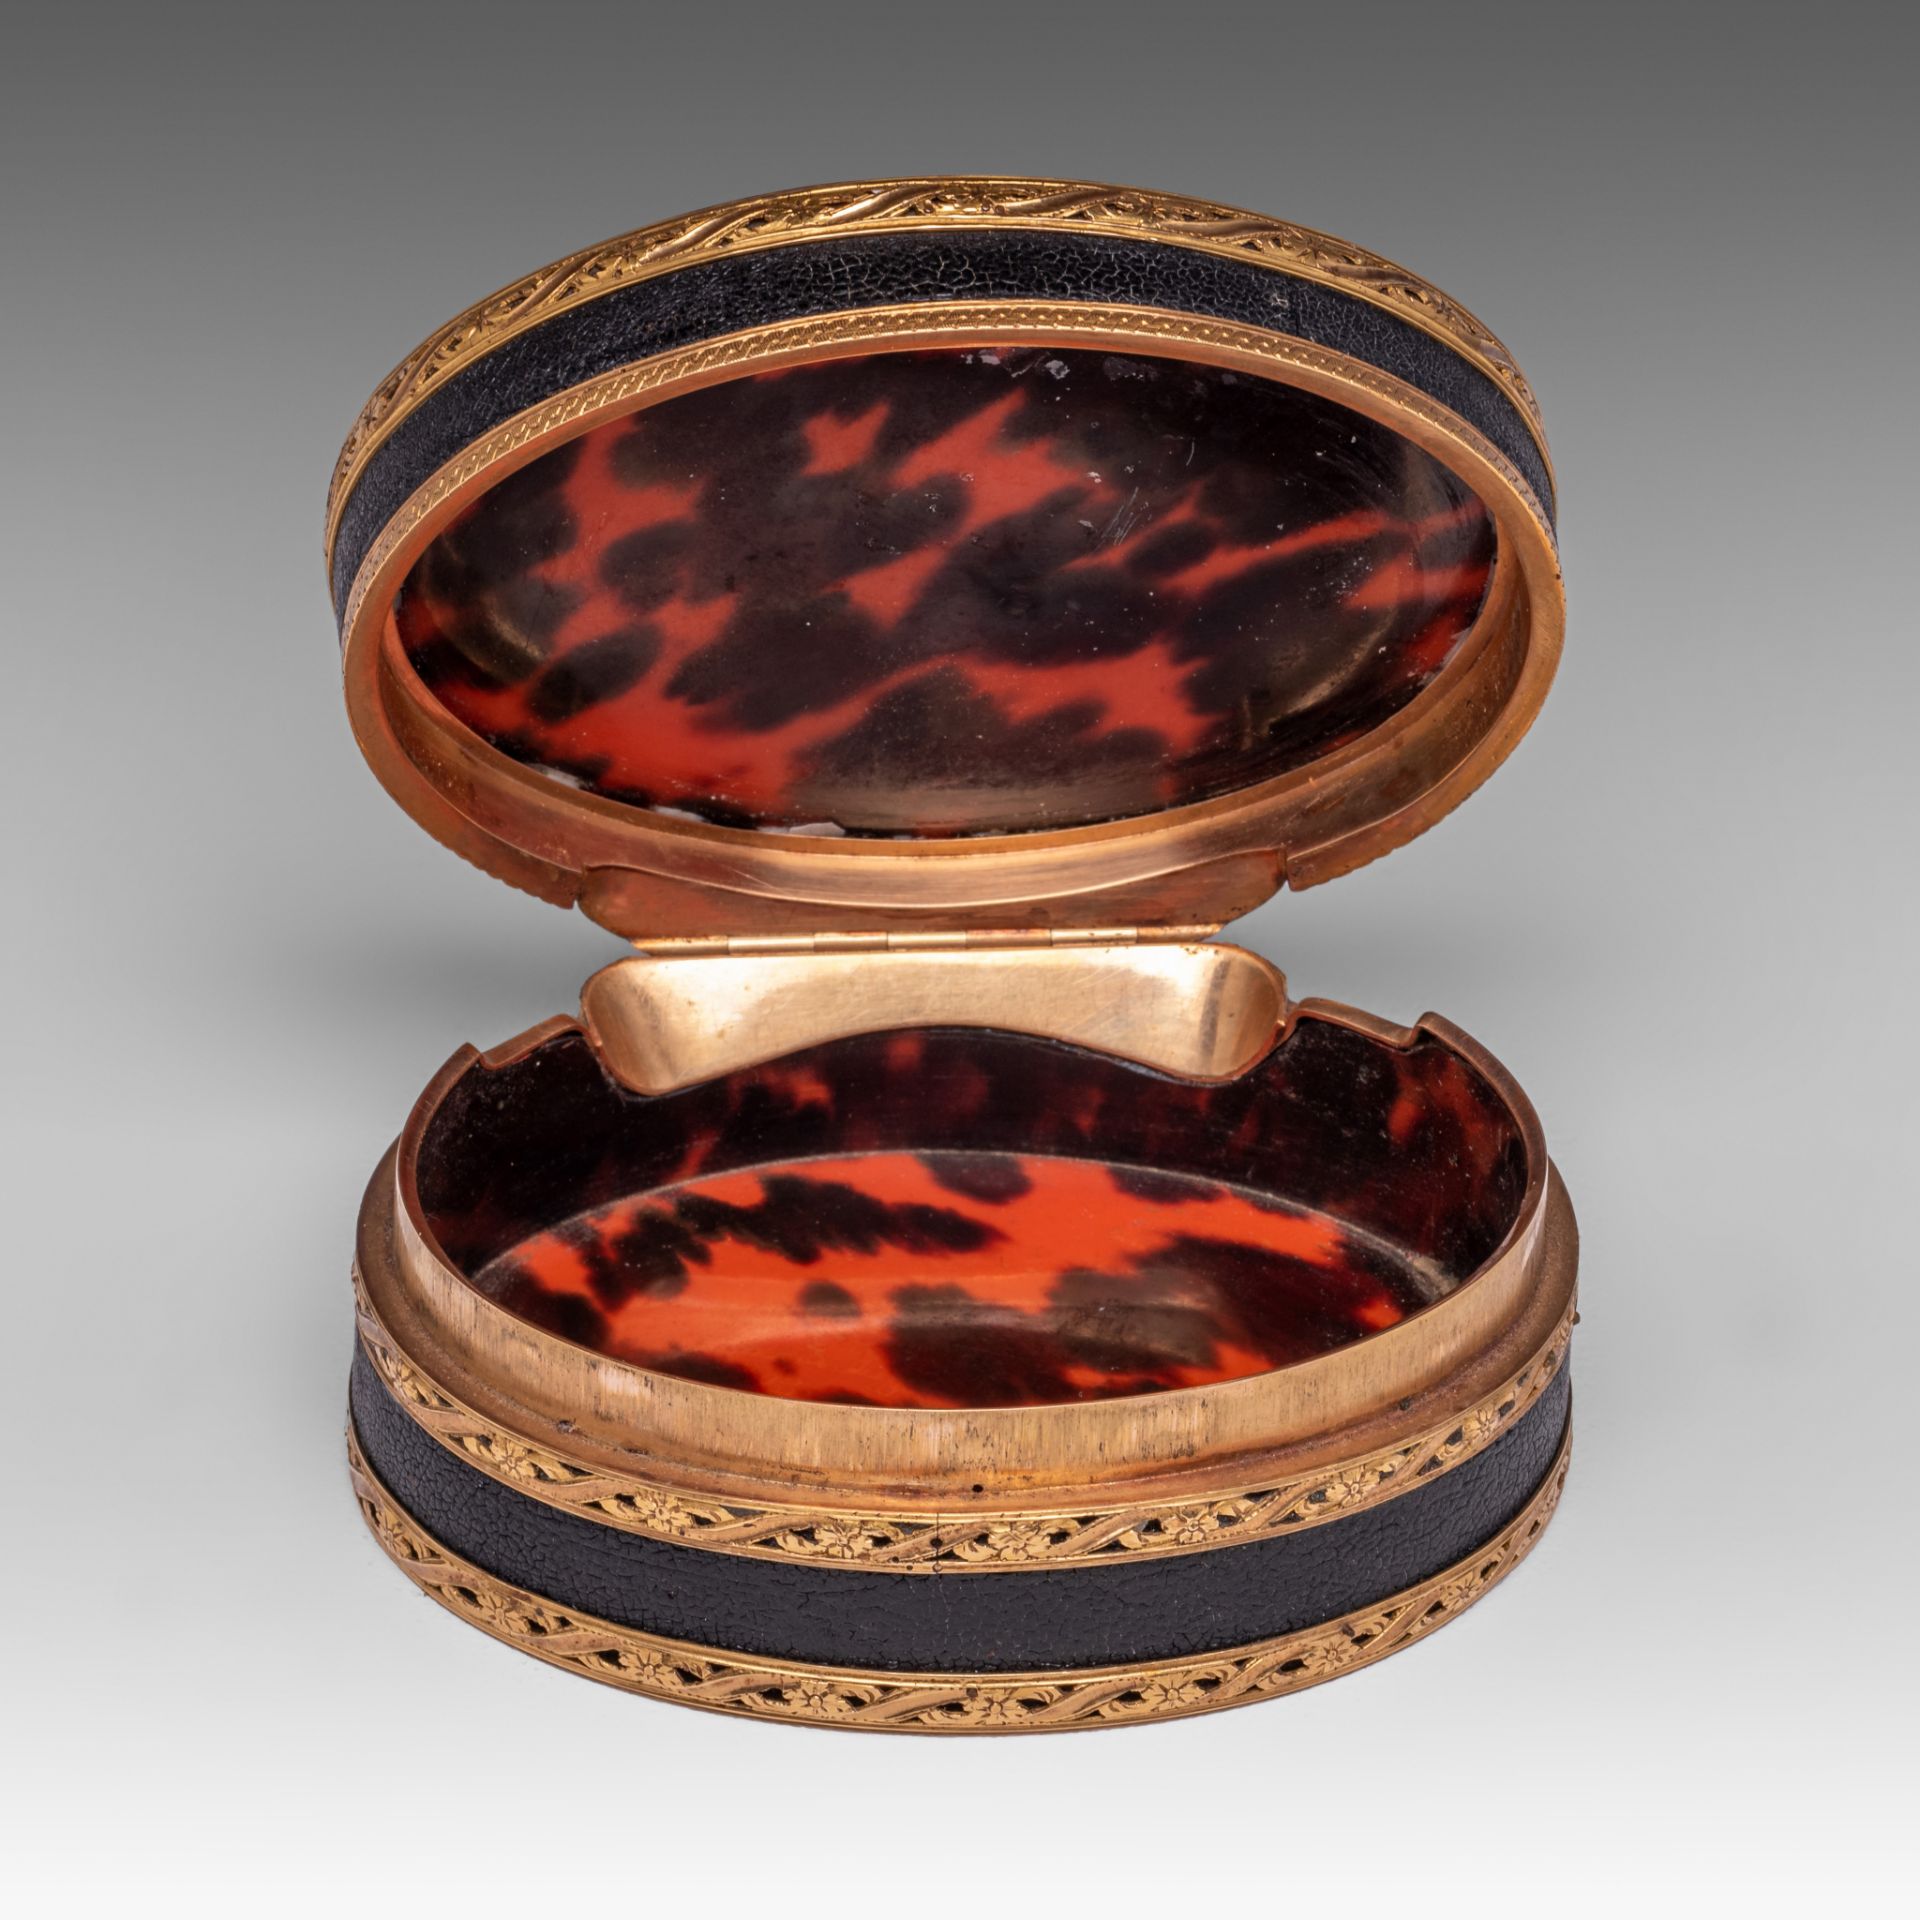 A fine Louis XVI leather and gold snuffbox, the inside with tortoiseshell, late 18thC, H 3,5 cm - Image 3 of 7